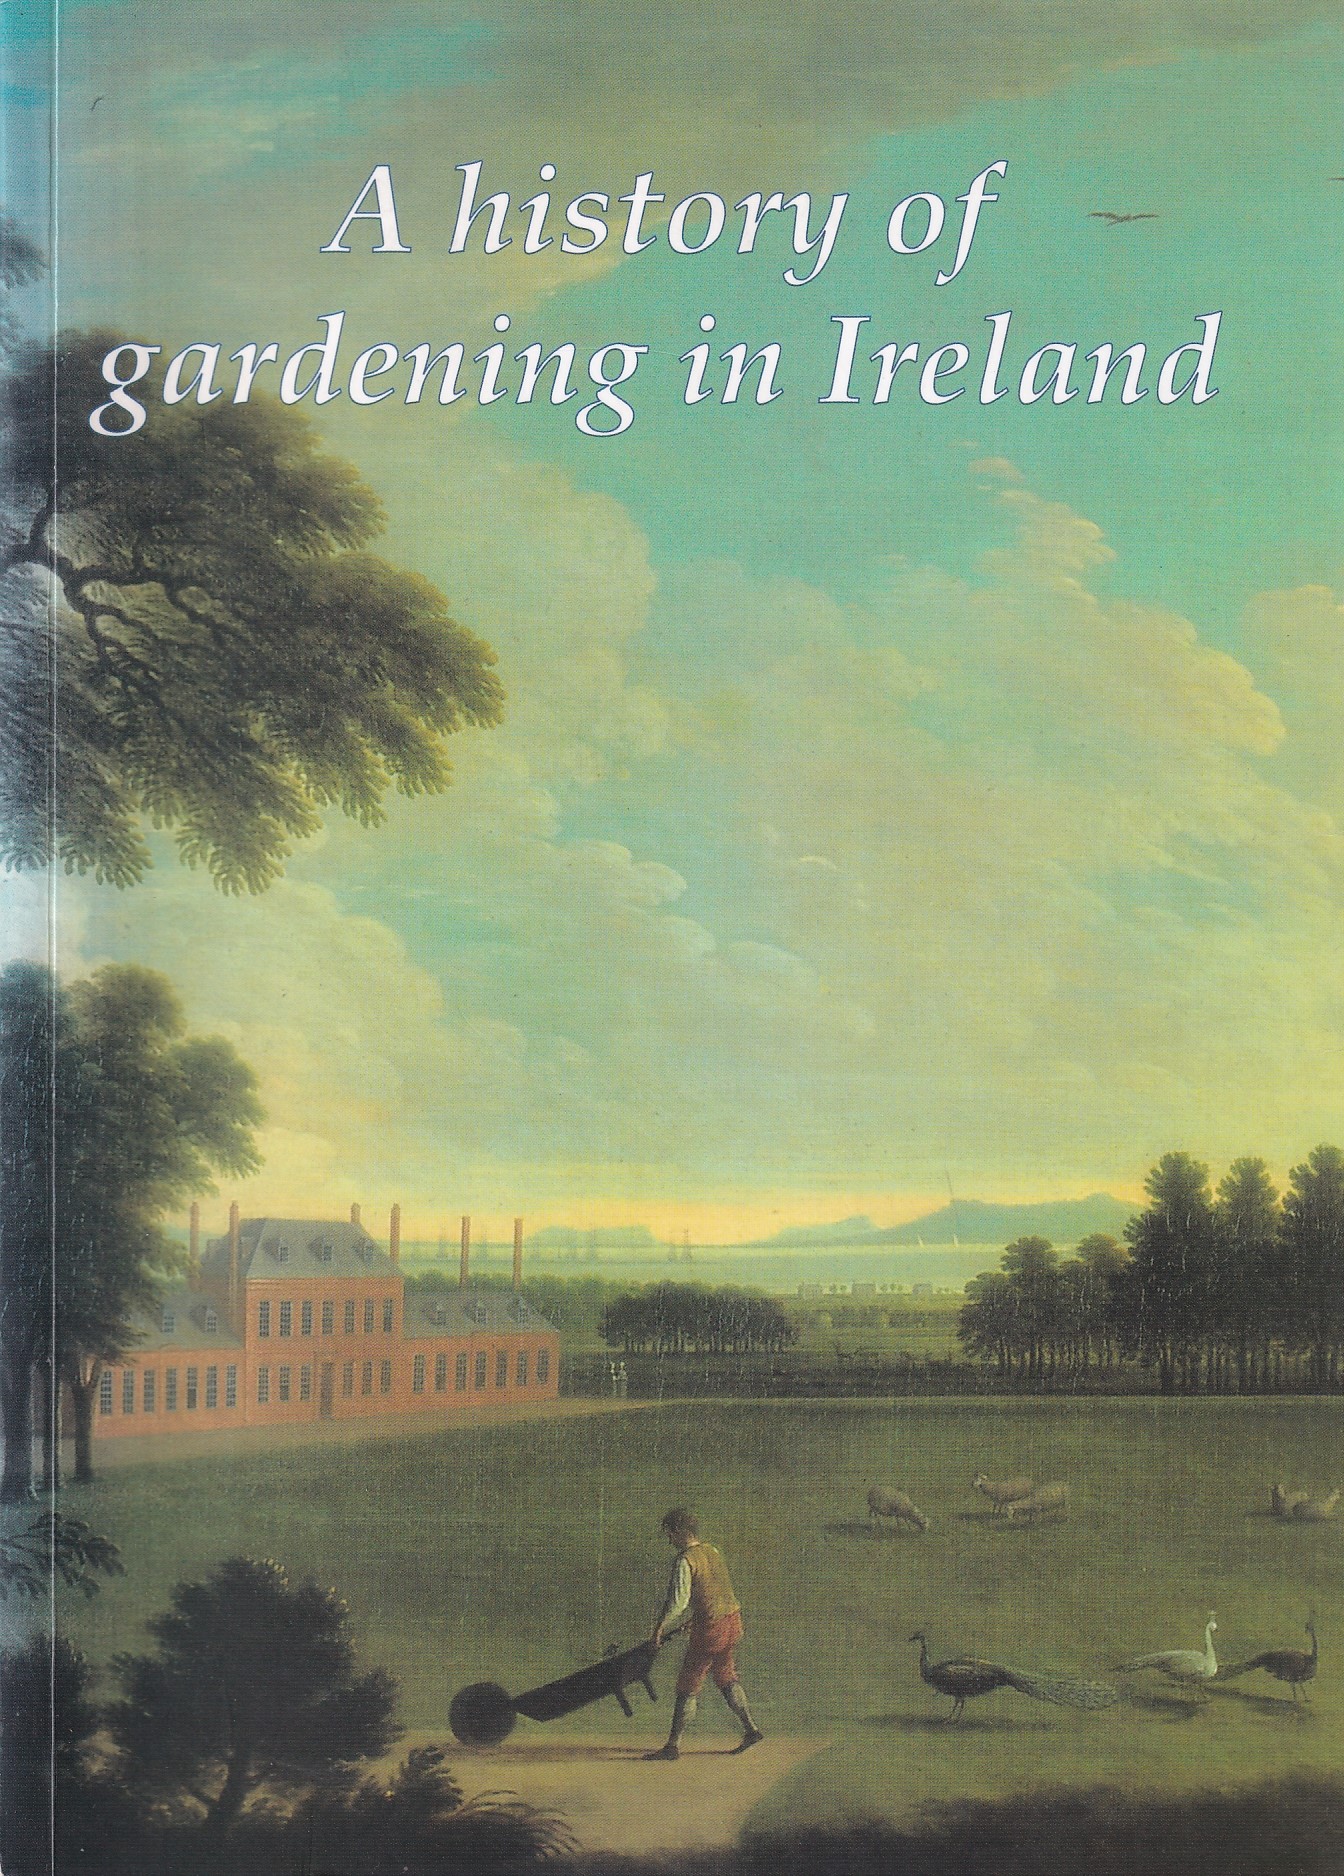 A History of Gardening in Ireland | Keith Lamb & Patrick Bowe | Charlie Byrne's